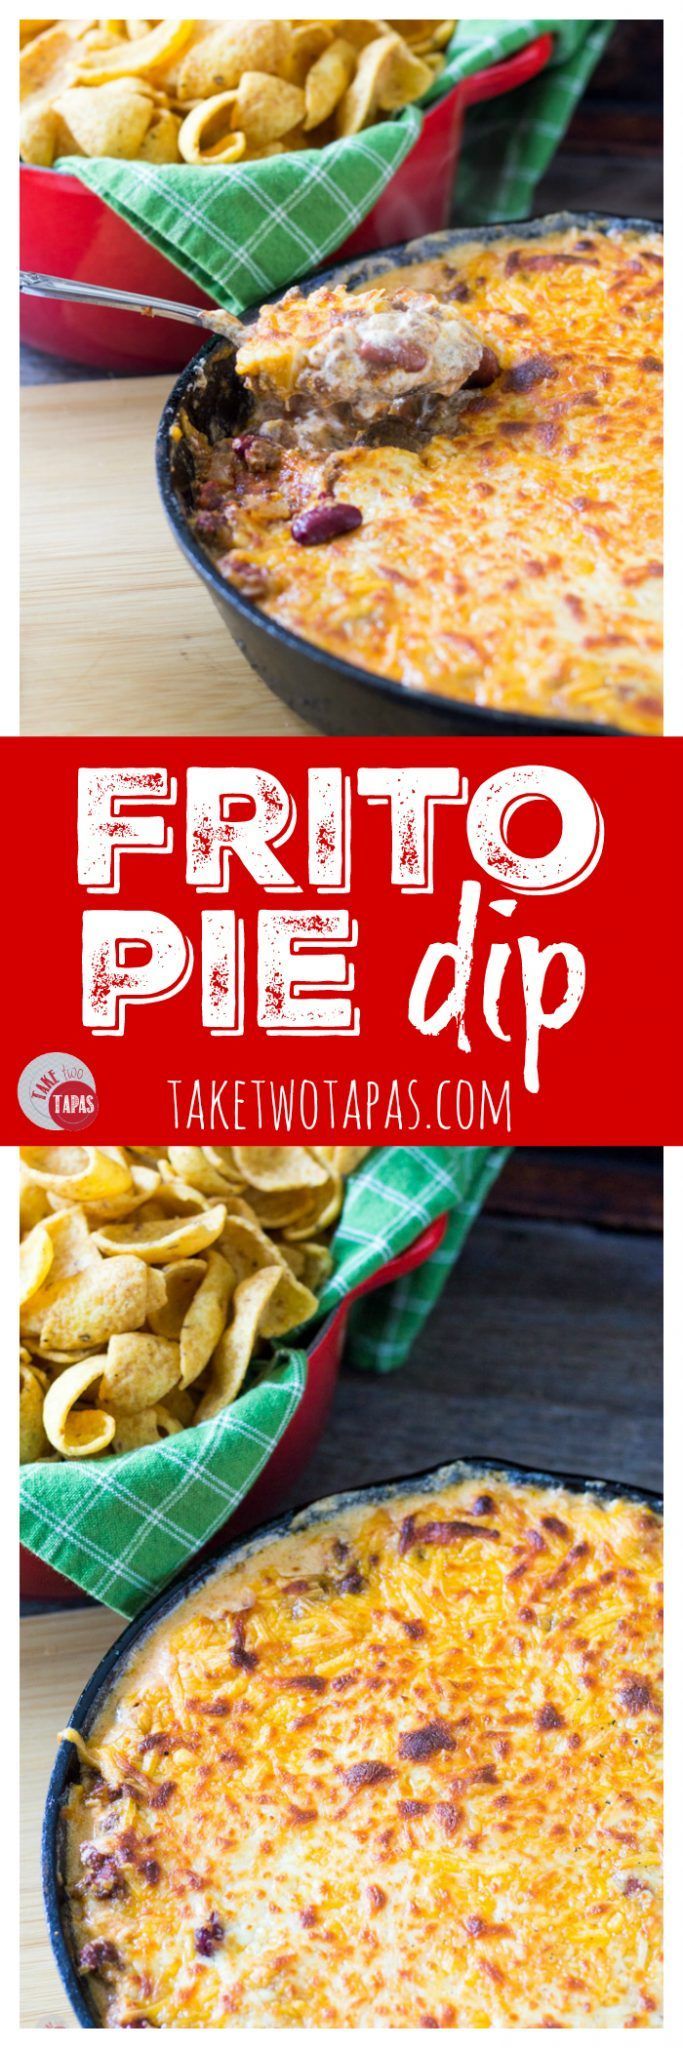 The classic Frito Pie dish containing corn chips, chili, and cheese is transformed into a dip you can scoop into your mouth with